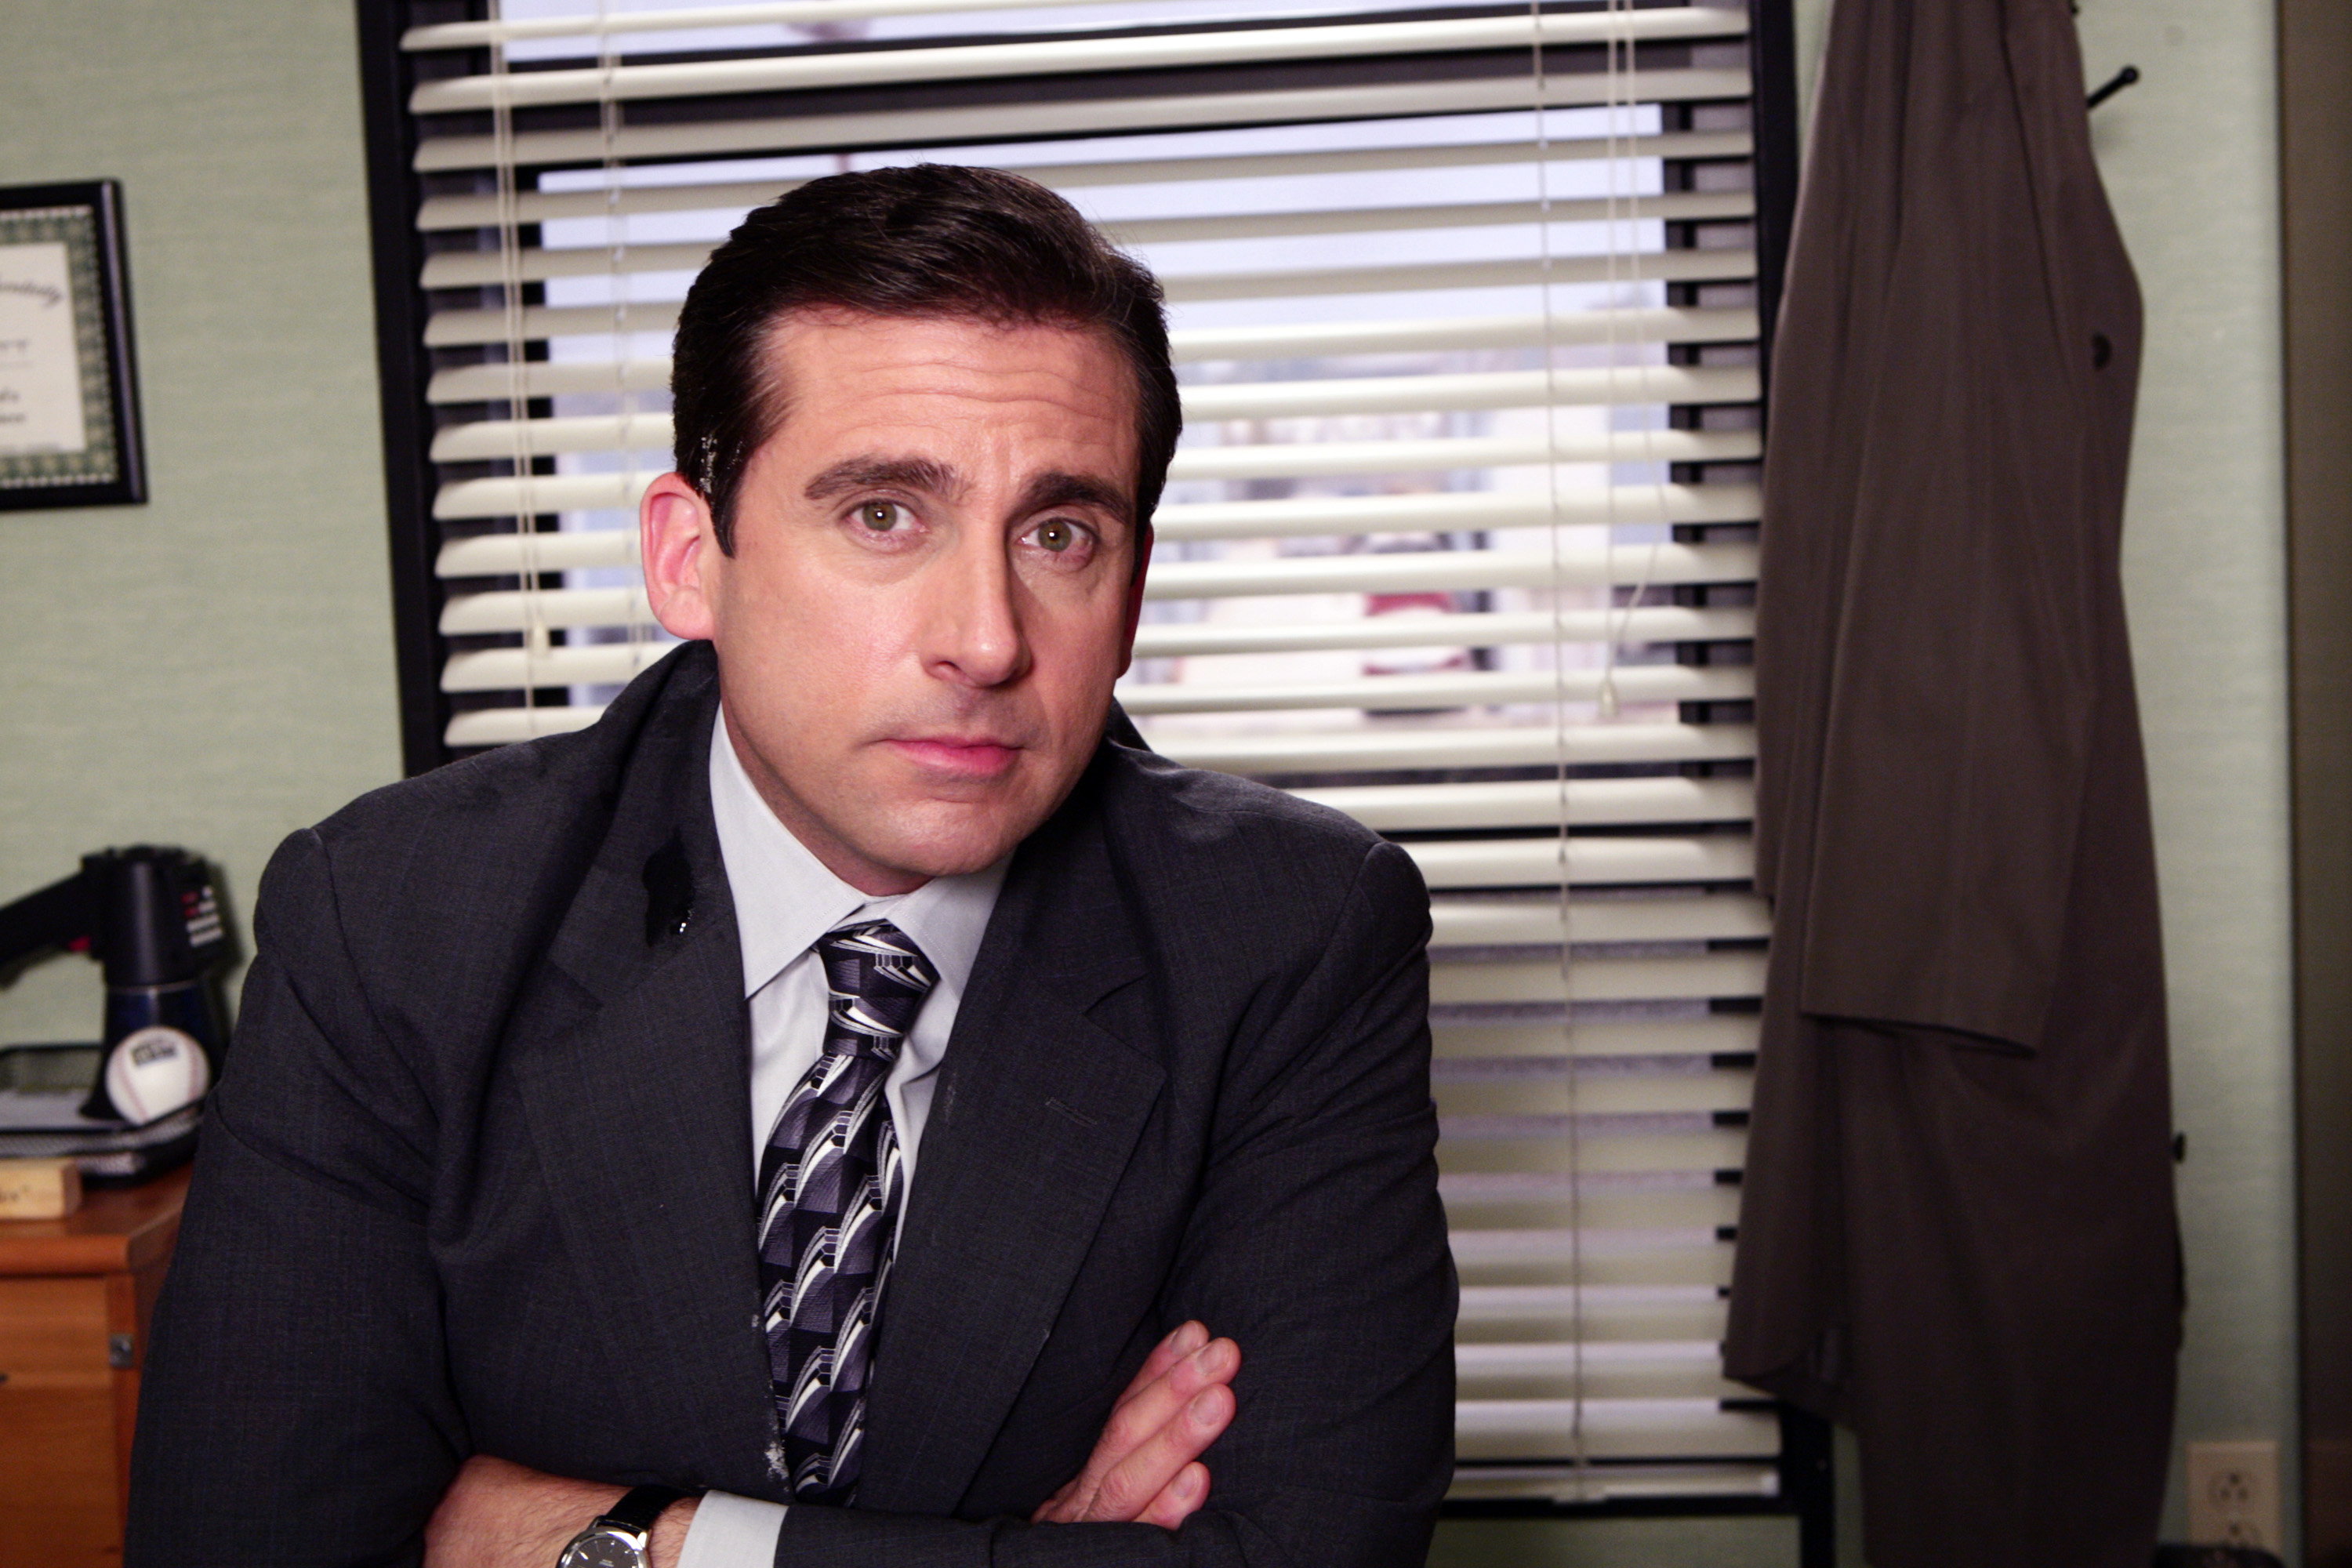 Watch the opening scene of 'The Office' on its 15th anniversary